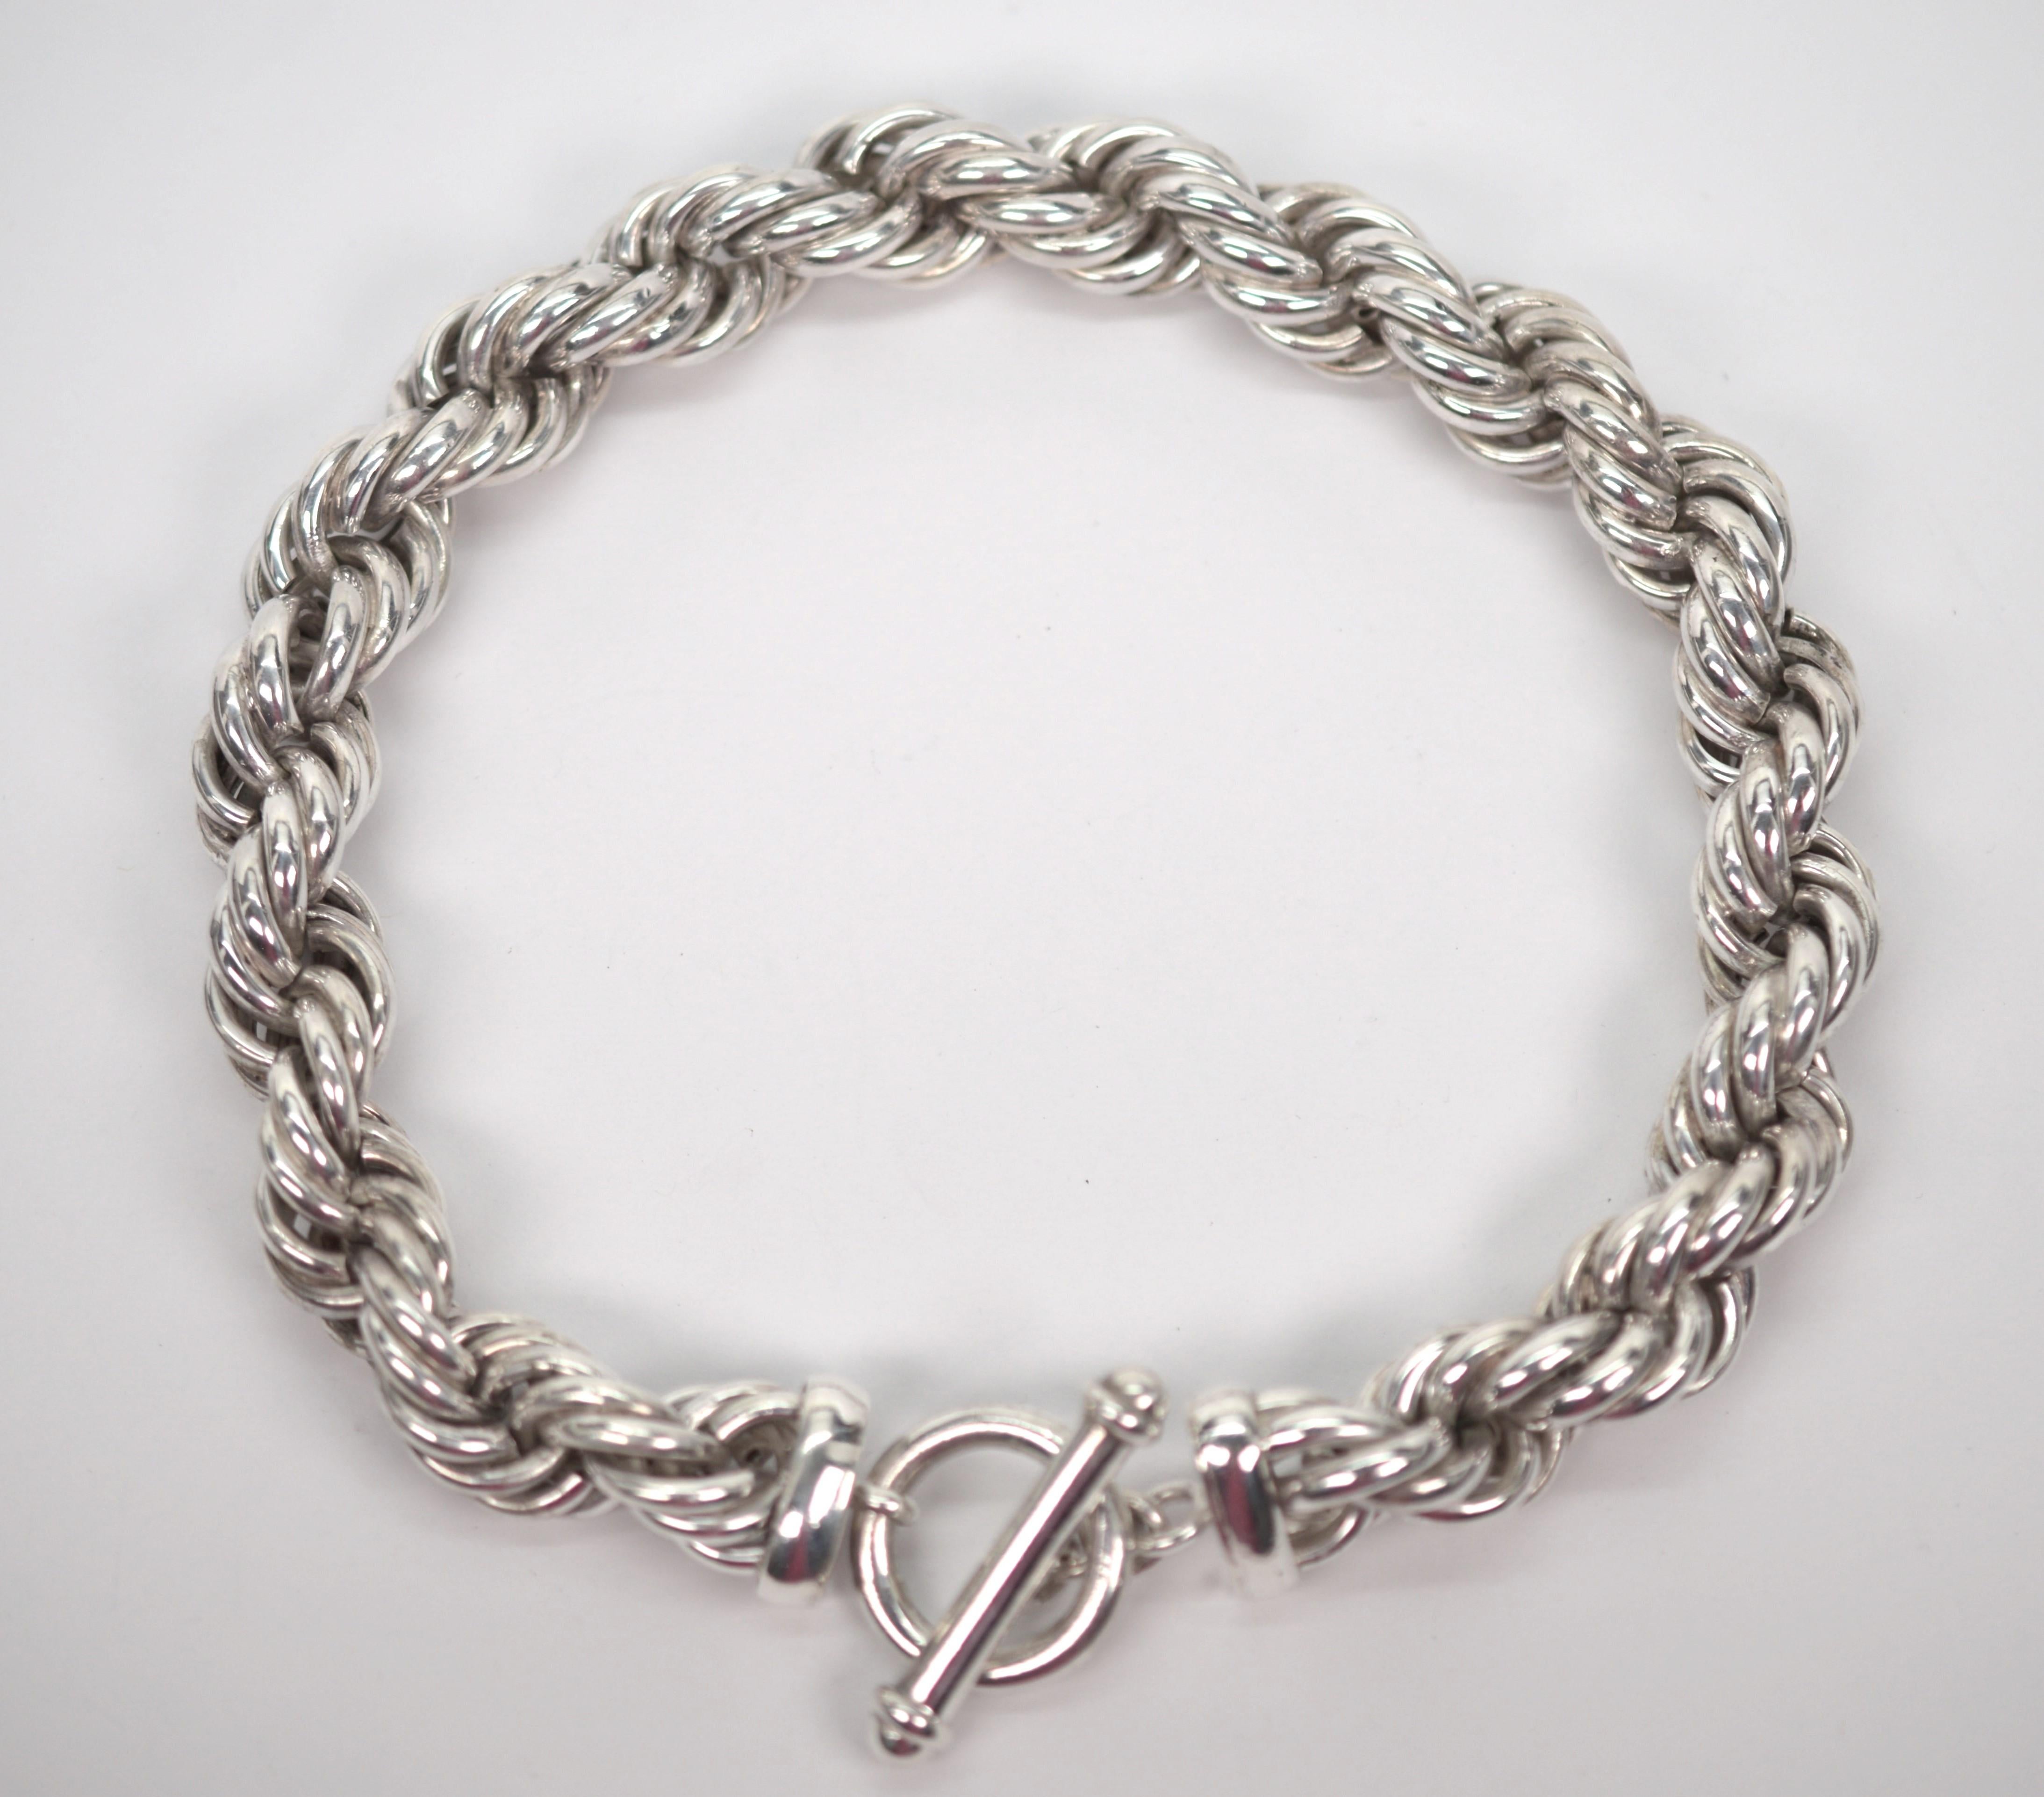 Impress with this vintage heavy gauge sterling silver twisted rope 16 inch necklace with toggle clasp. Hand assembled of .925 silver meticulously intertwined and approximately 17mm thick. Wear with toggle to back or front for an additional look.